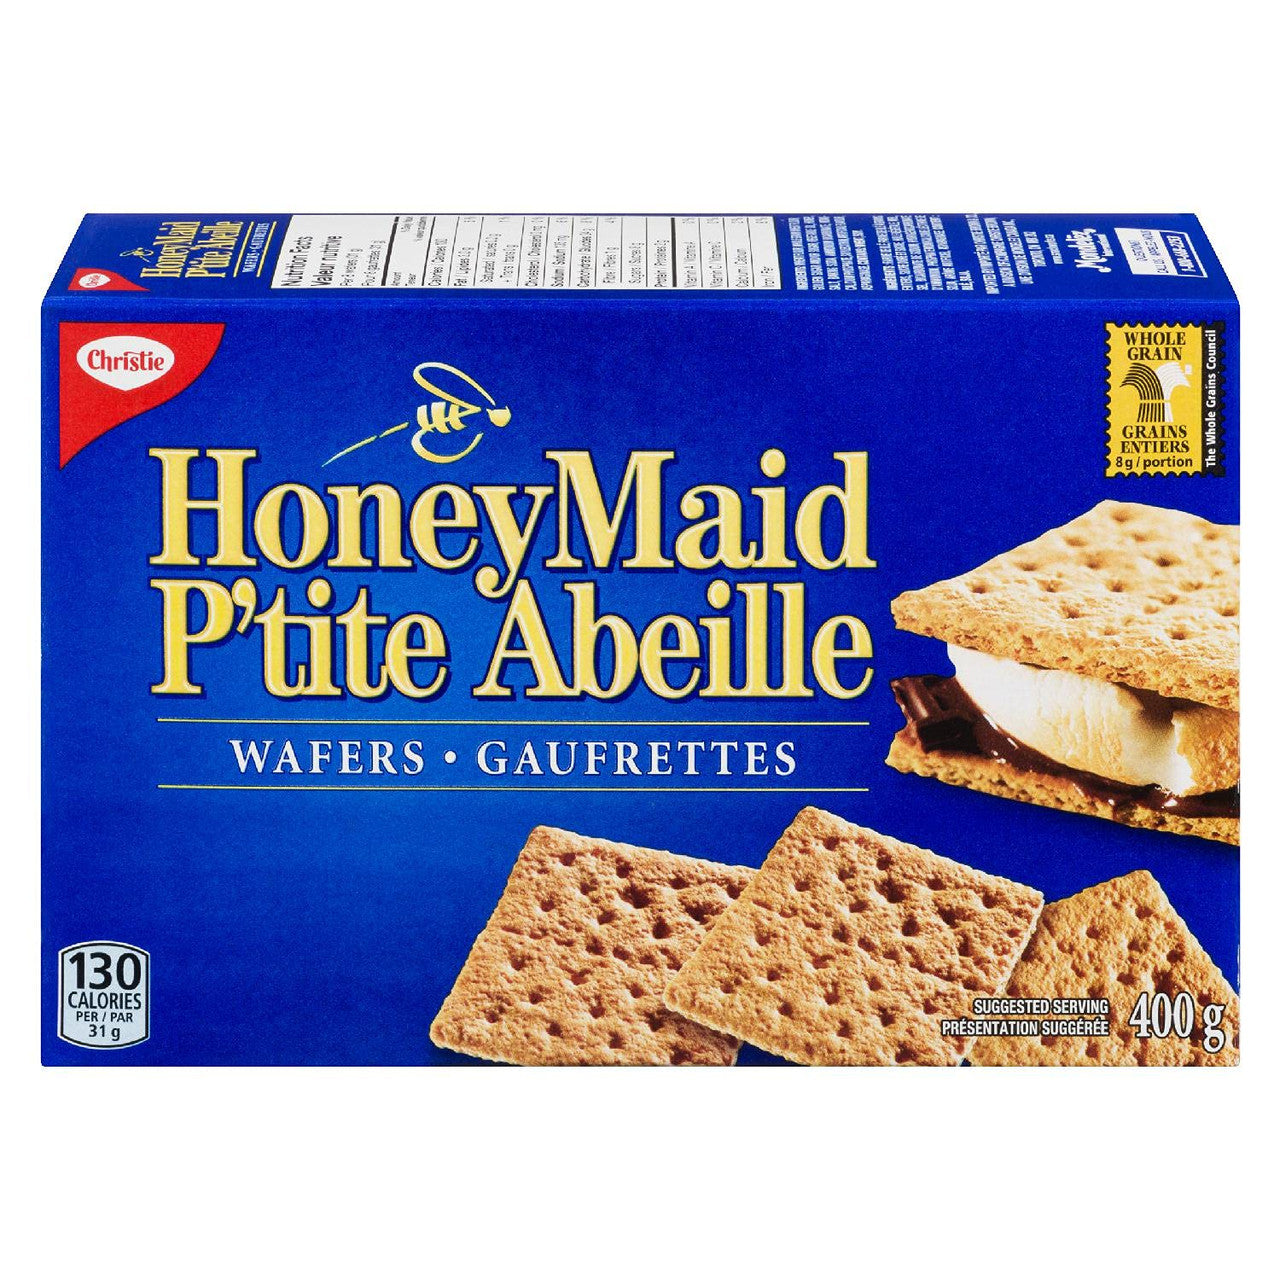 Christie Honey Maid Graham Cracker Wafers Boxes, Summer Camping Snacks, 12 Count, 400g/14.1 oz., {Imported from Canada}